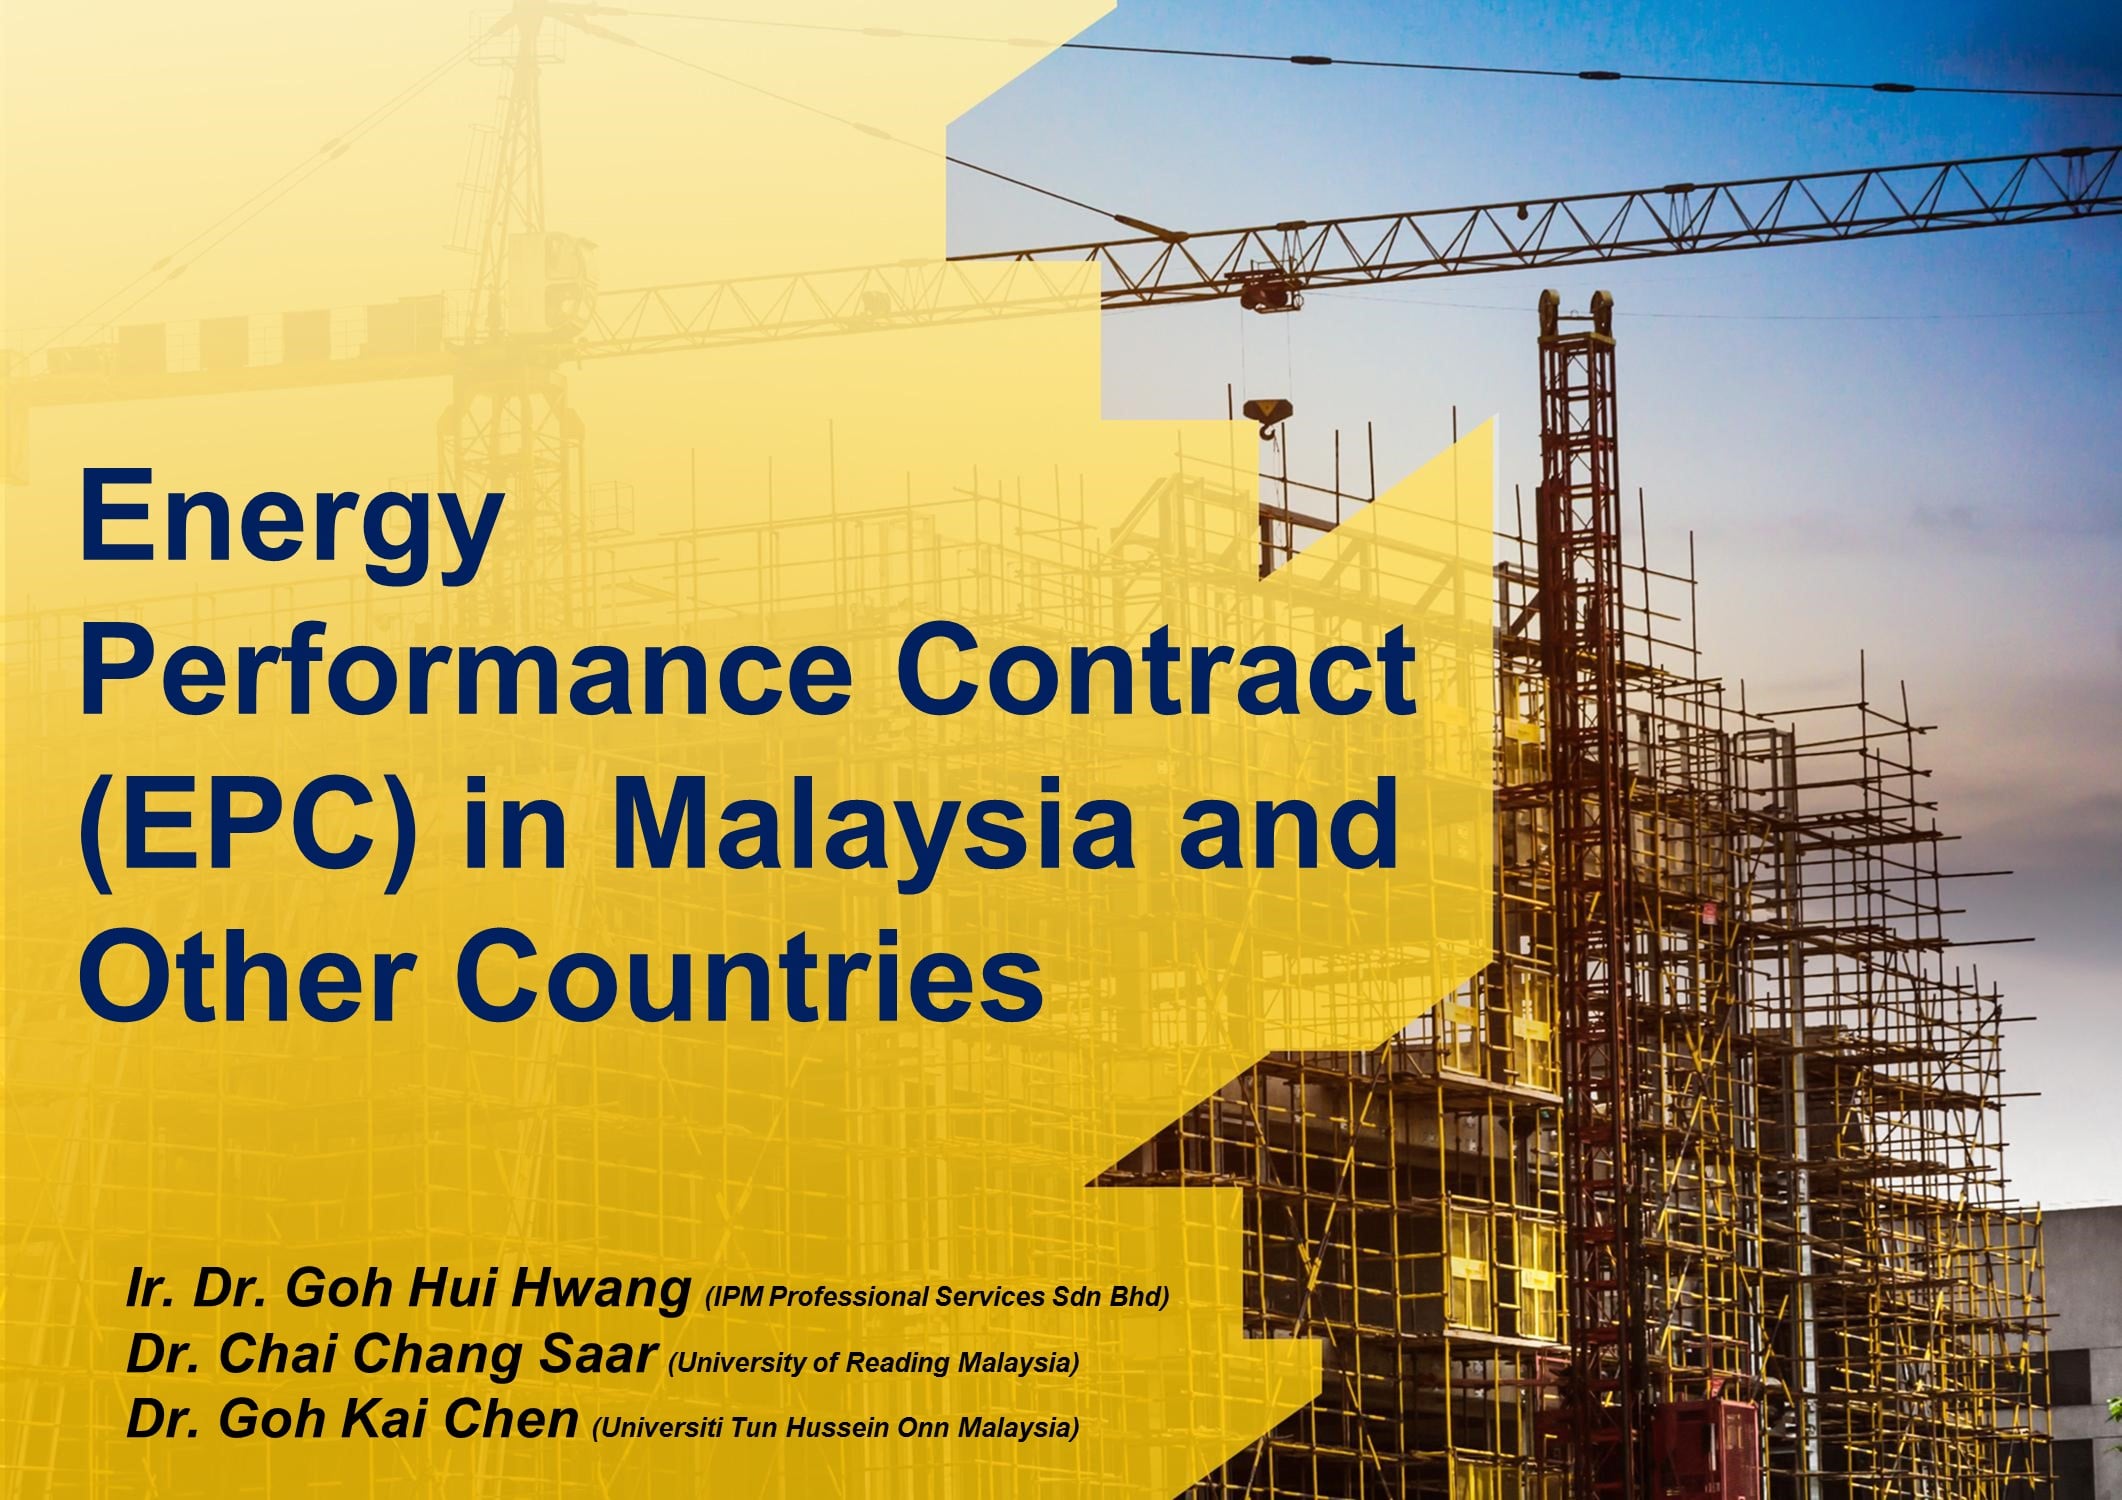 Energy Performance Contract (EPC) in Malaysia and Other Countries